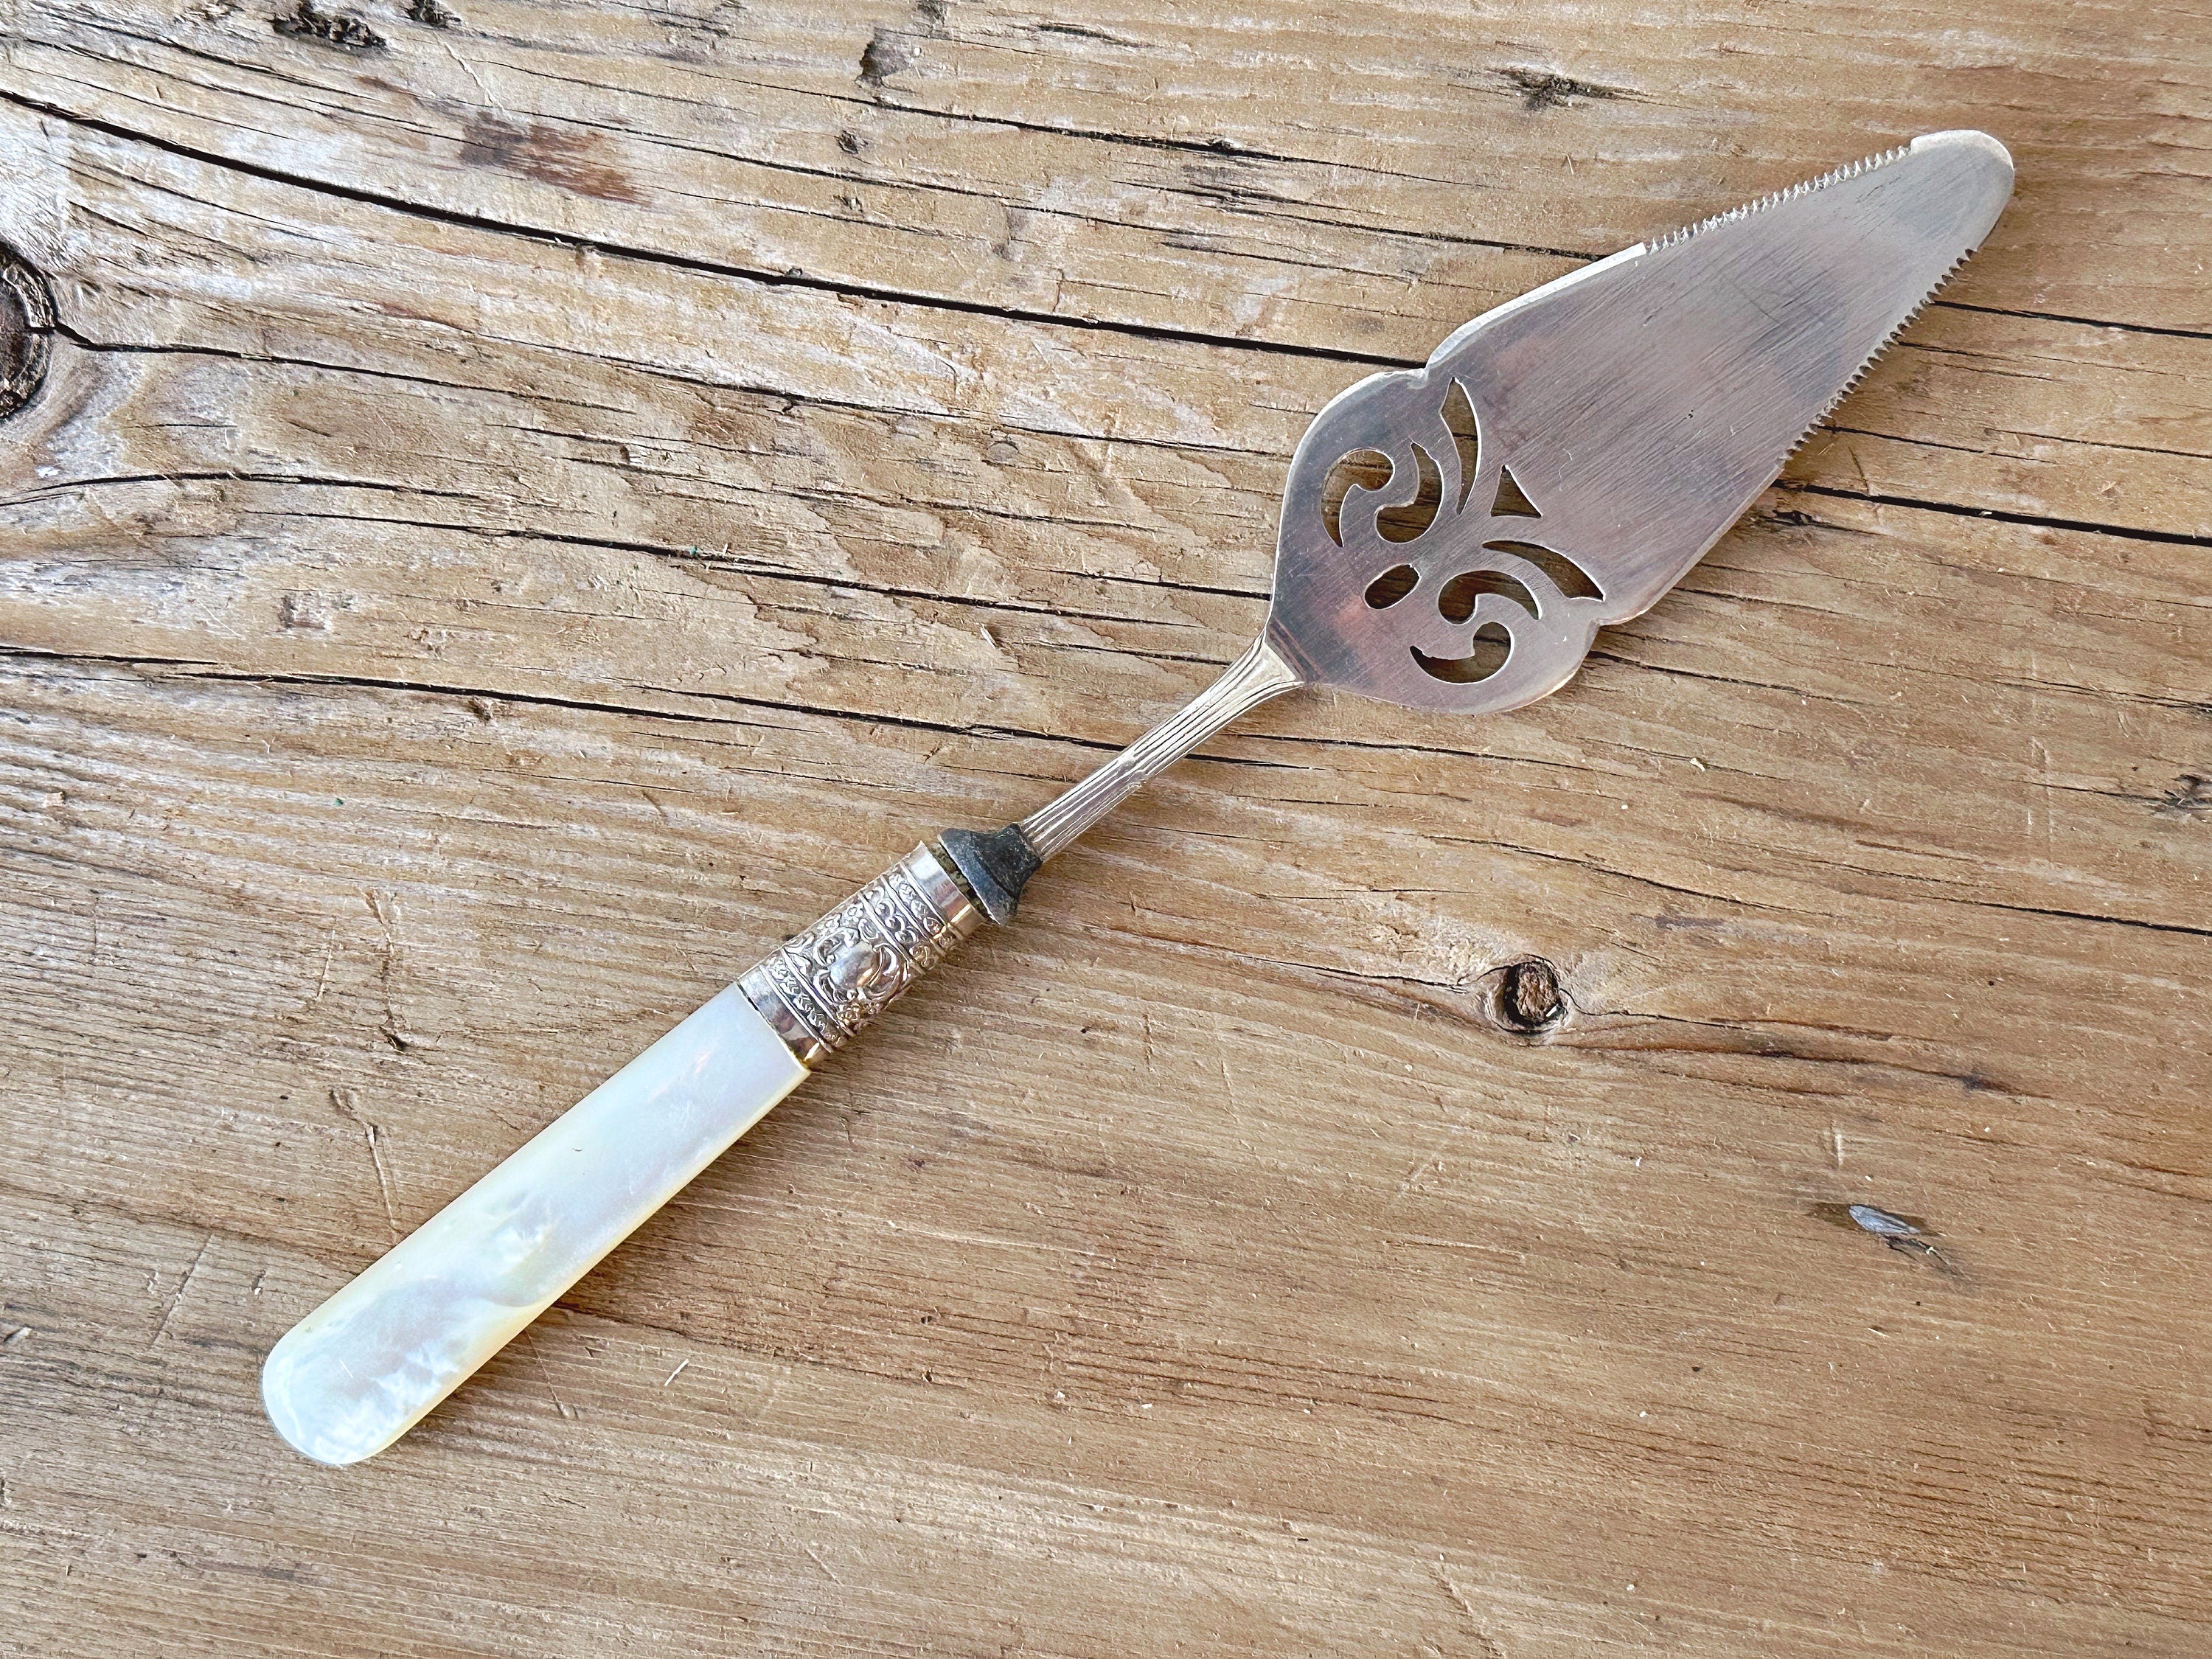 Antique Victorian Silver-Plated Cake Server with Pearl Handle | EPNS Sheffield Made in England c. 1900 | Vintage Large Serving Knife